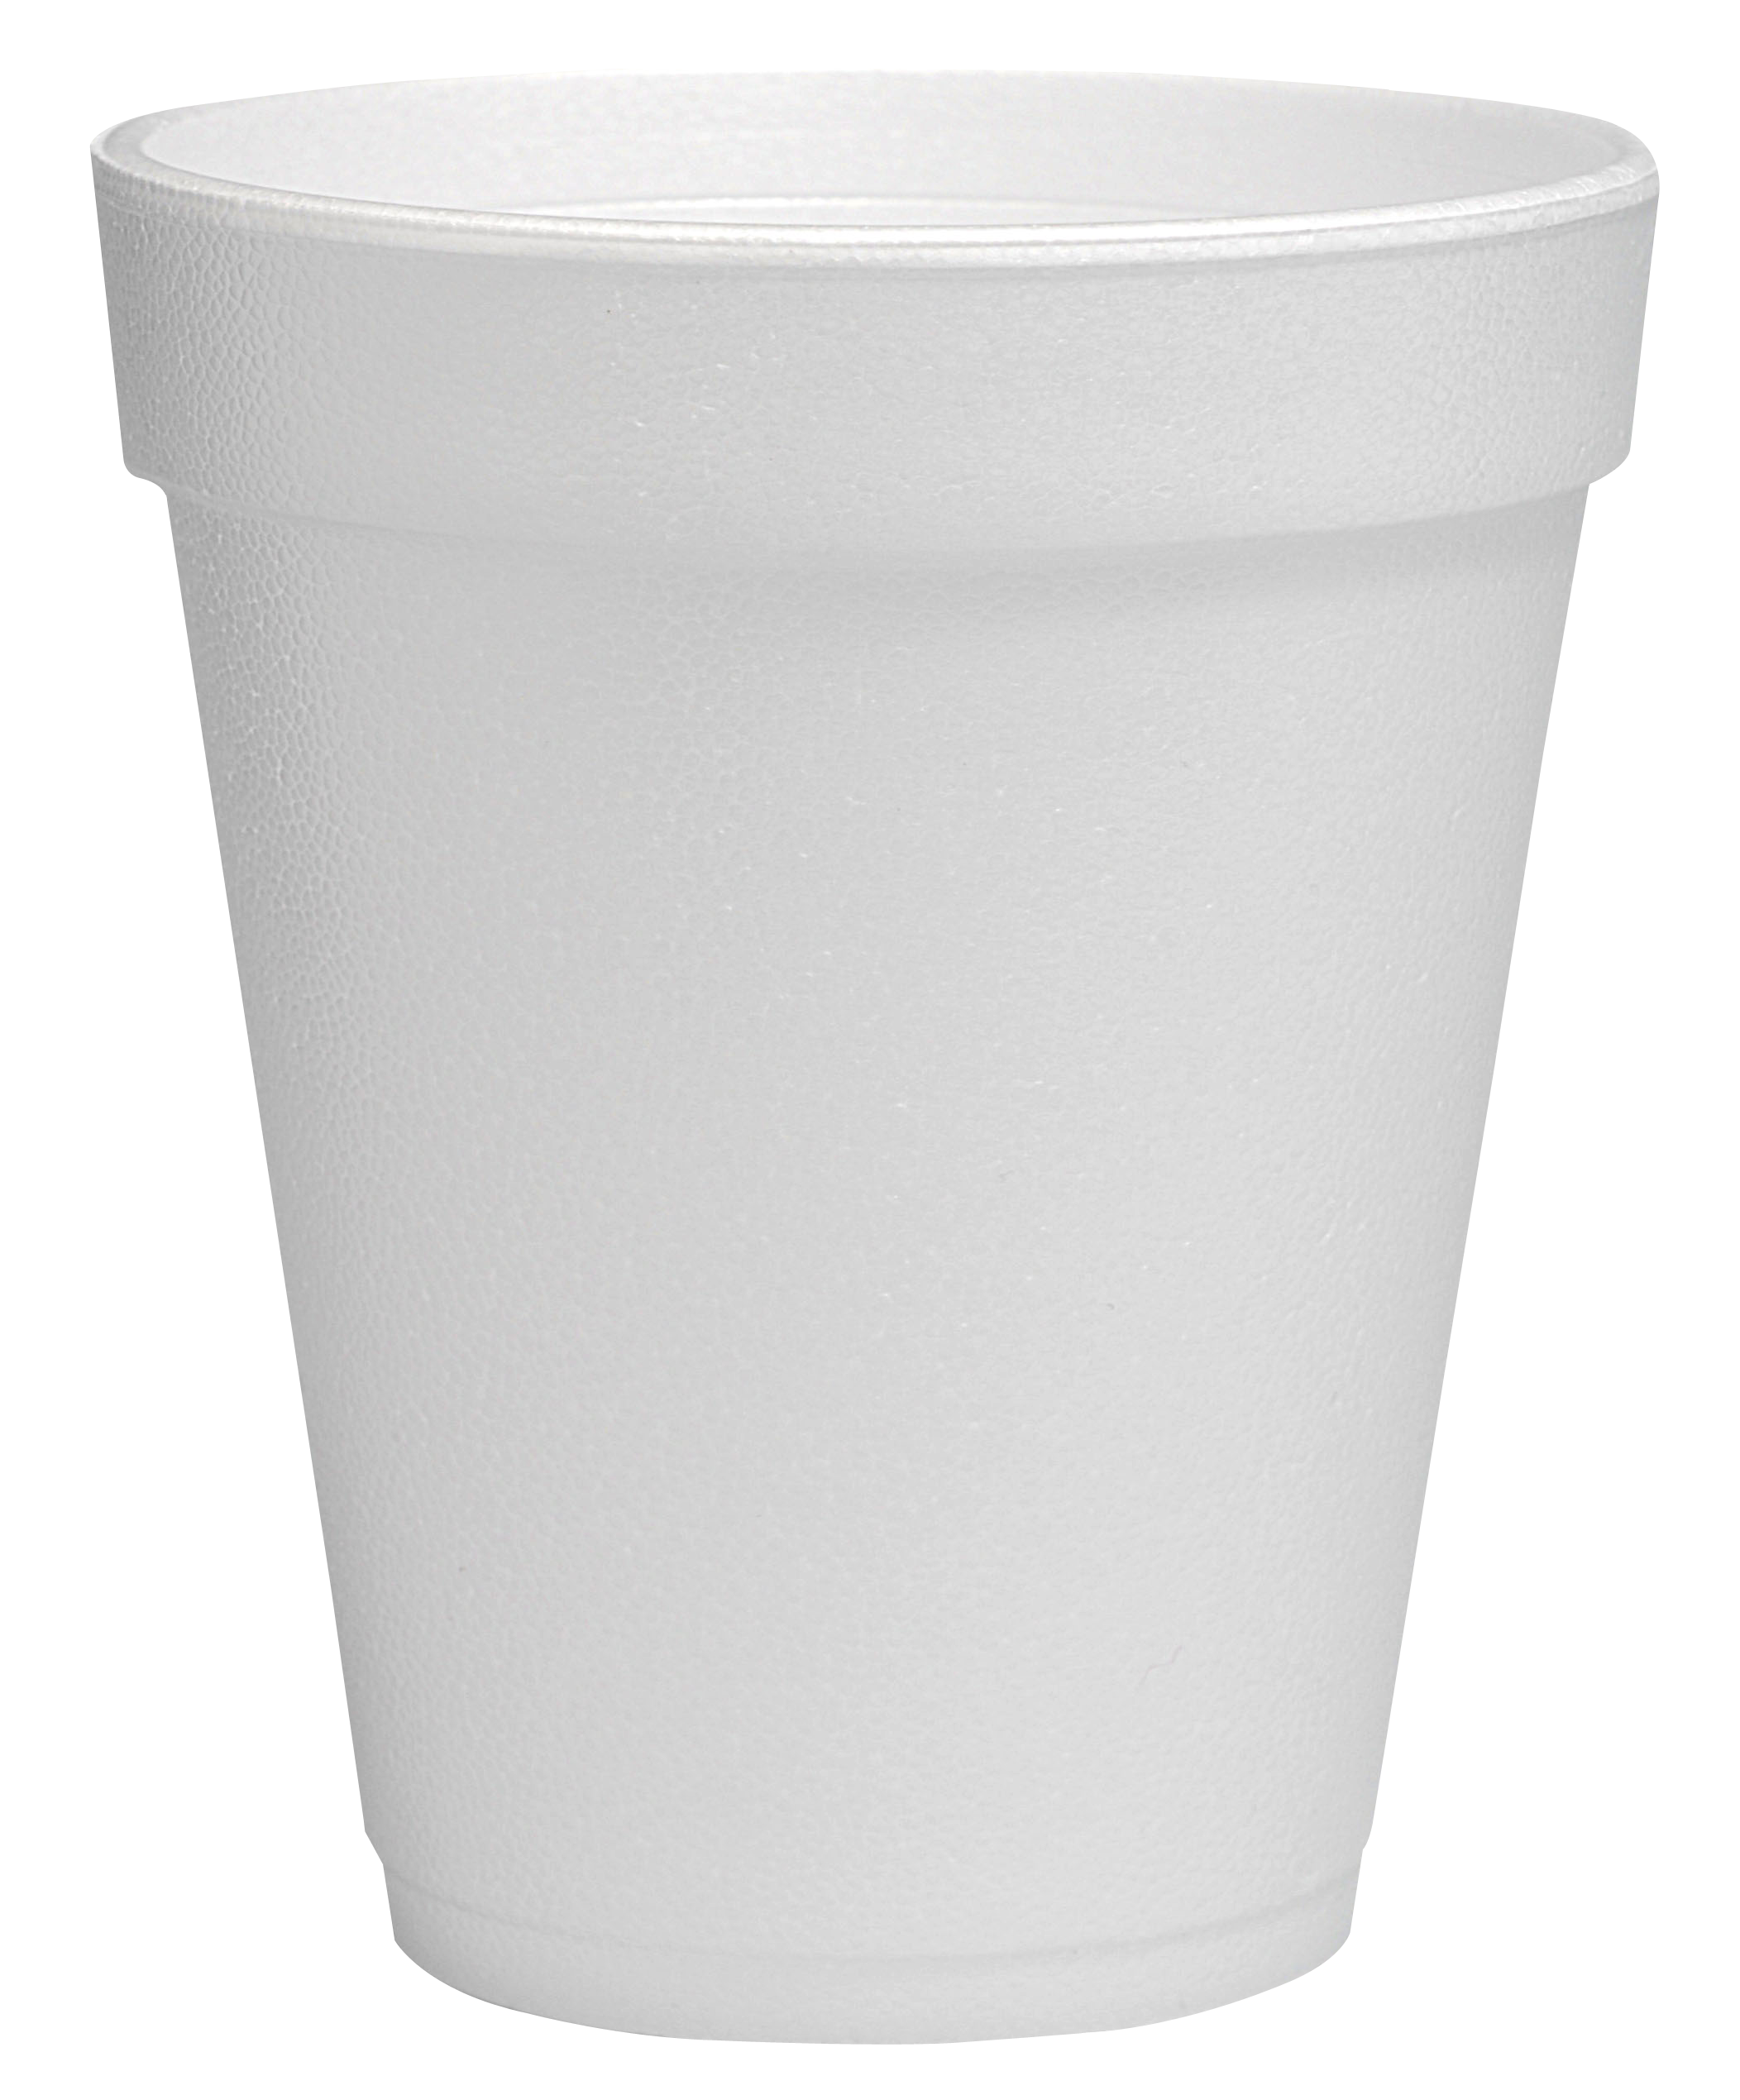 Cup clipart colored plastic. Png image purepng free